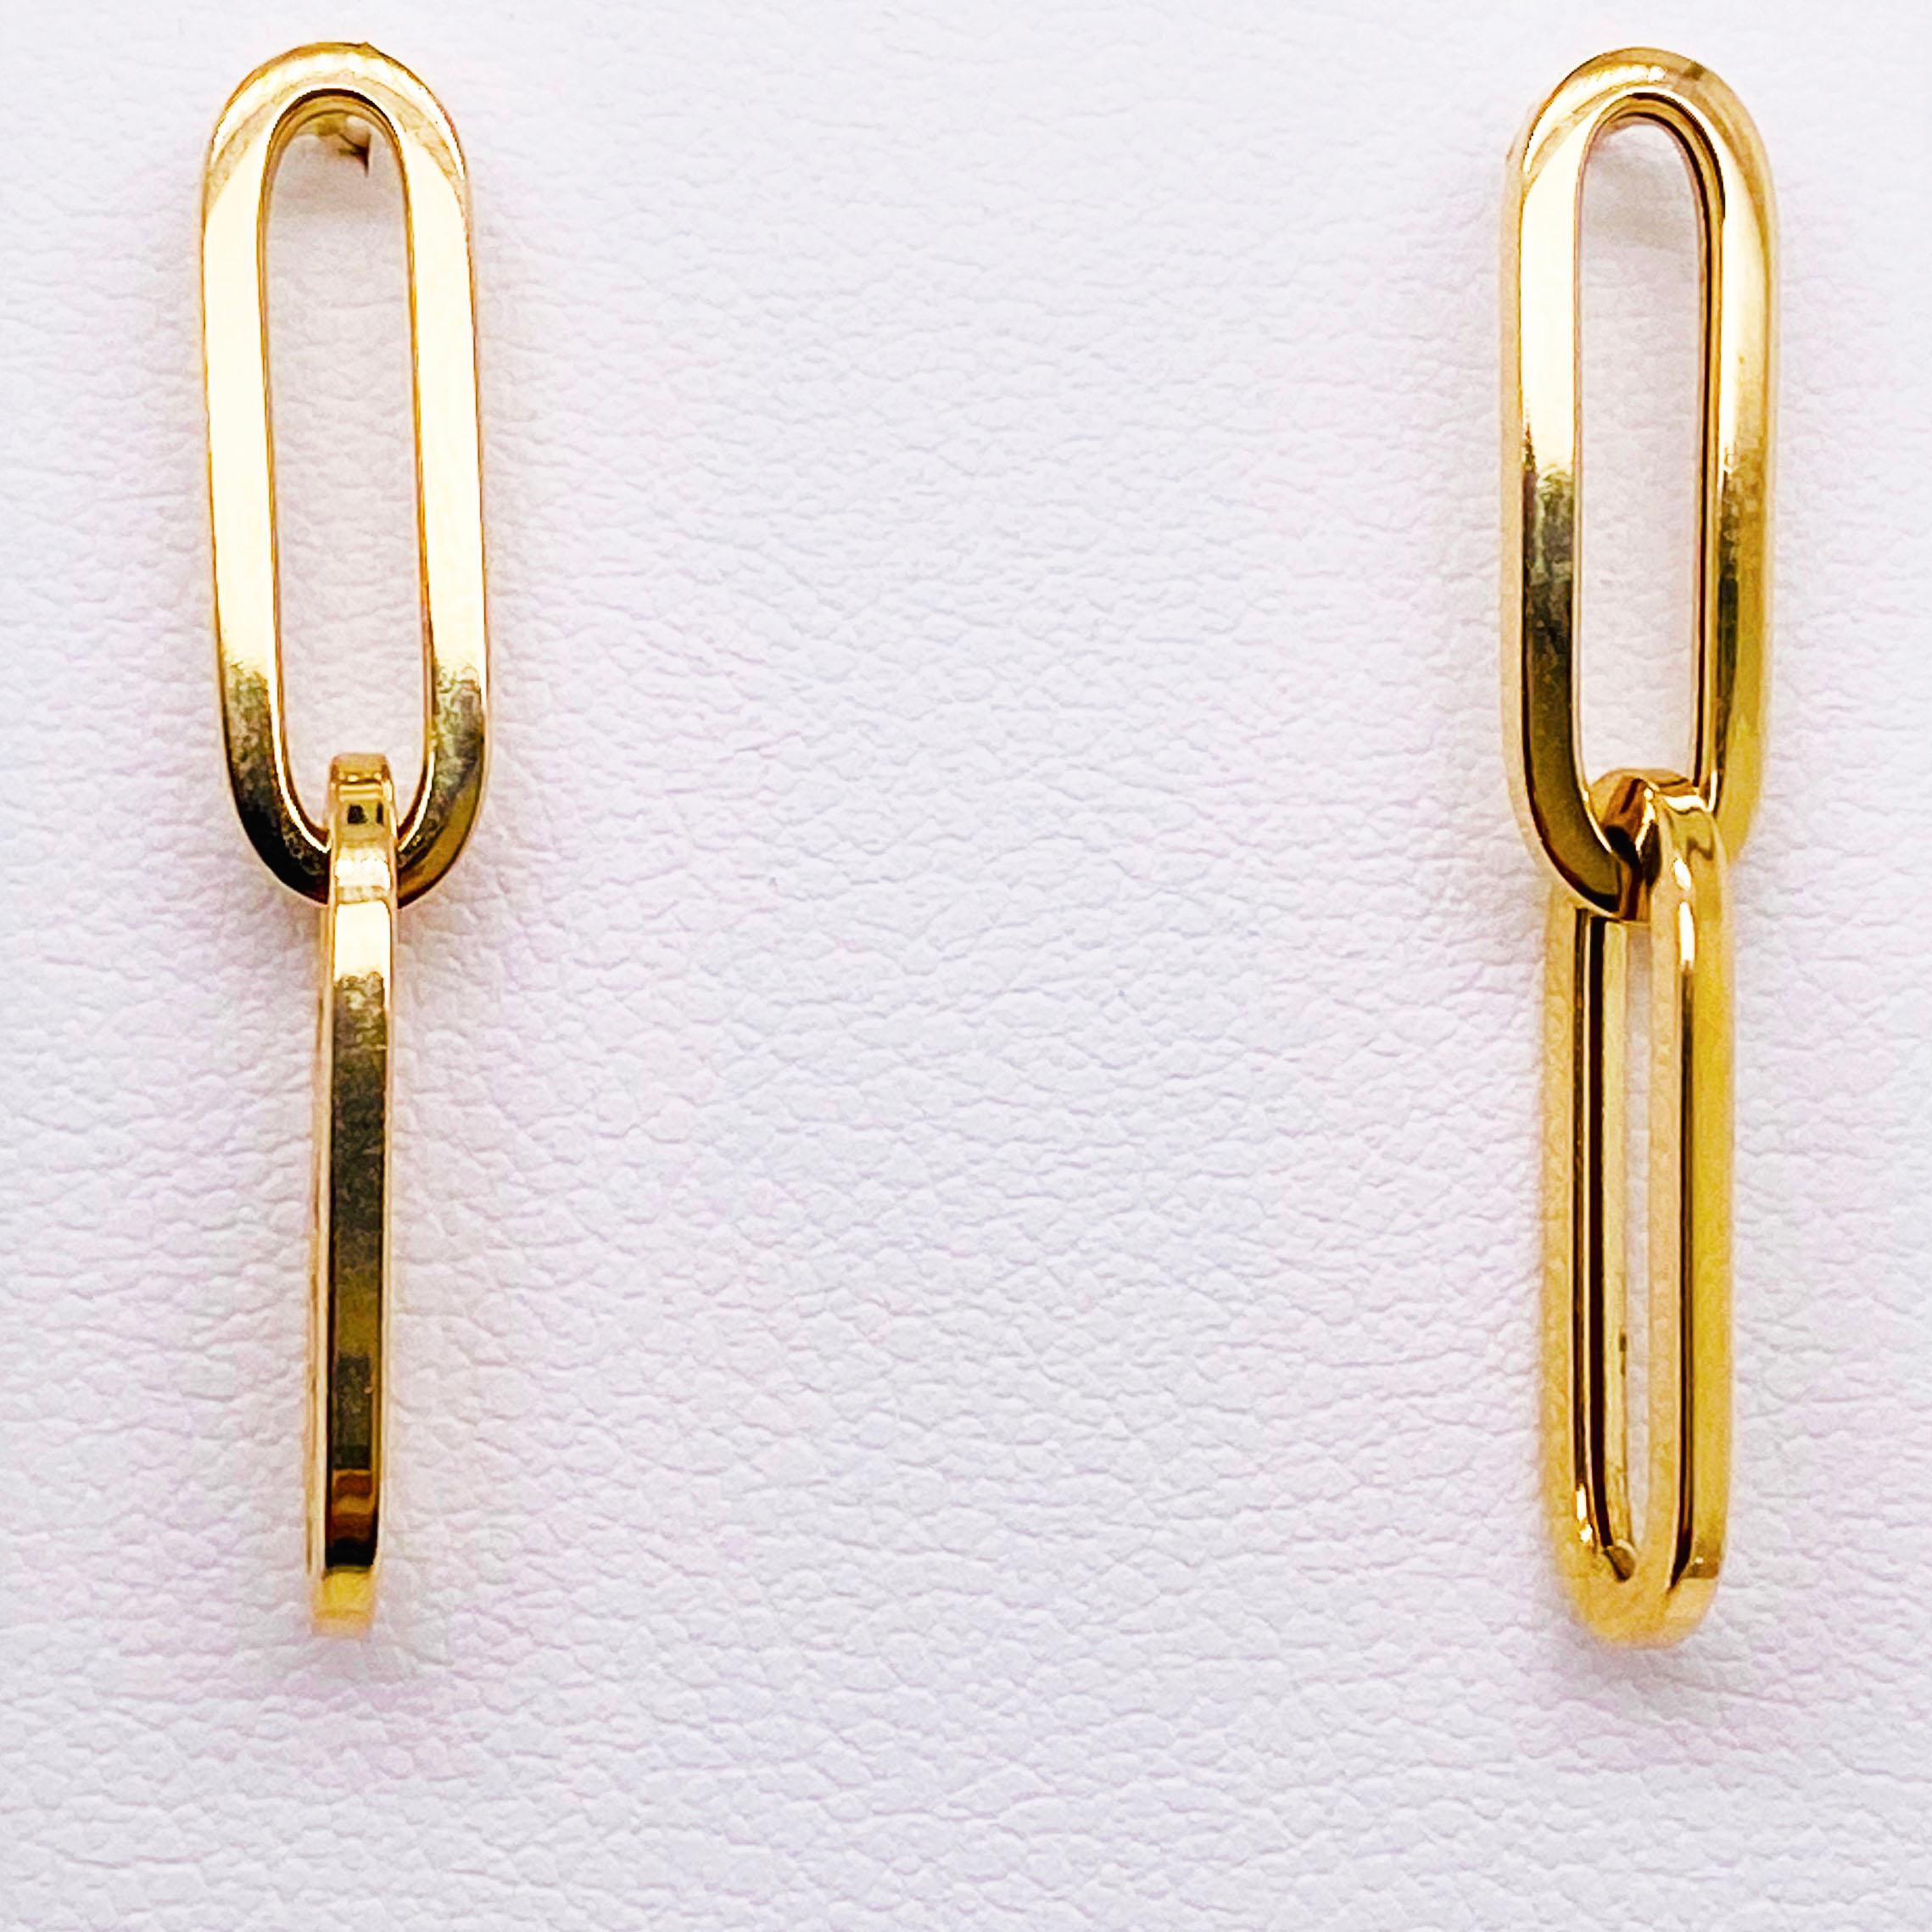 2020 FASHION JEWELRY - the latest fine jewelry fad! 
These gorgeous, fashionable paperclip link chain earrings are individually, handmade paperclip large links. With each link handmade in 14k yellow gold. The links are squared and measure 5.75 mm